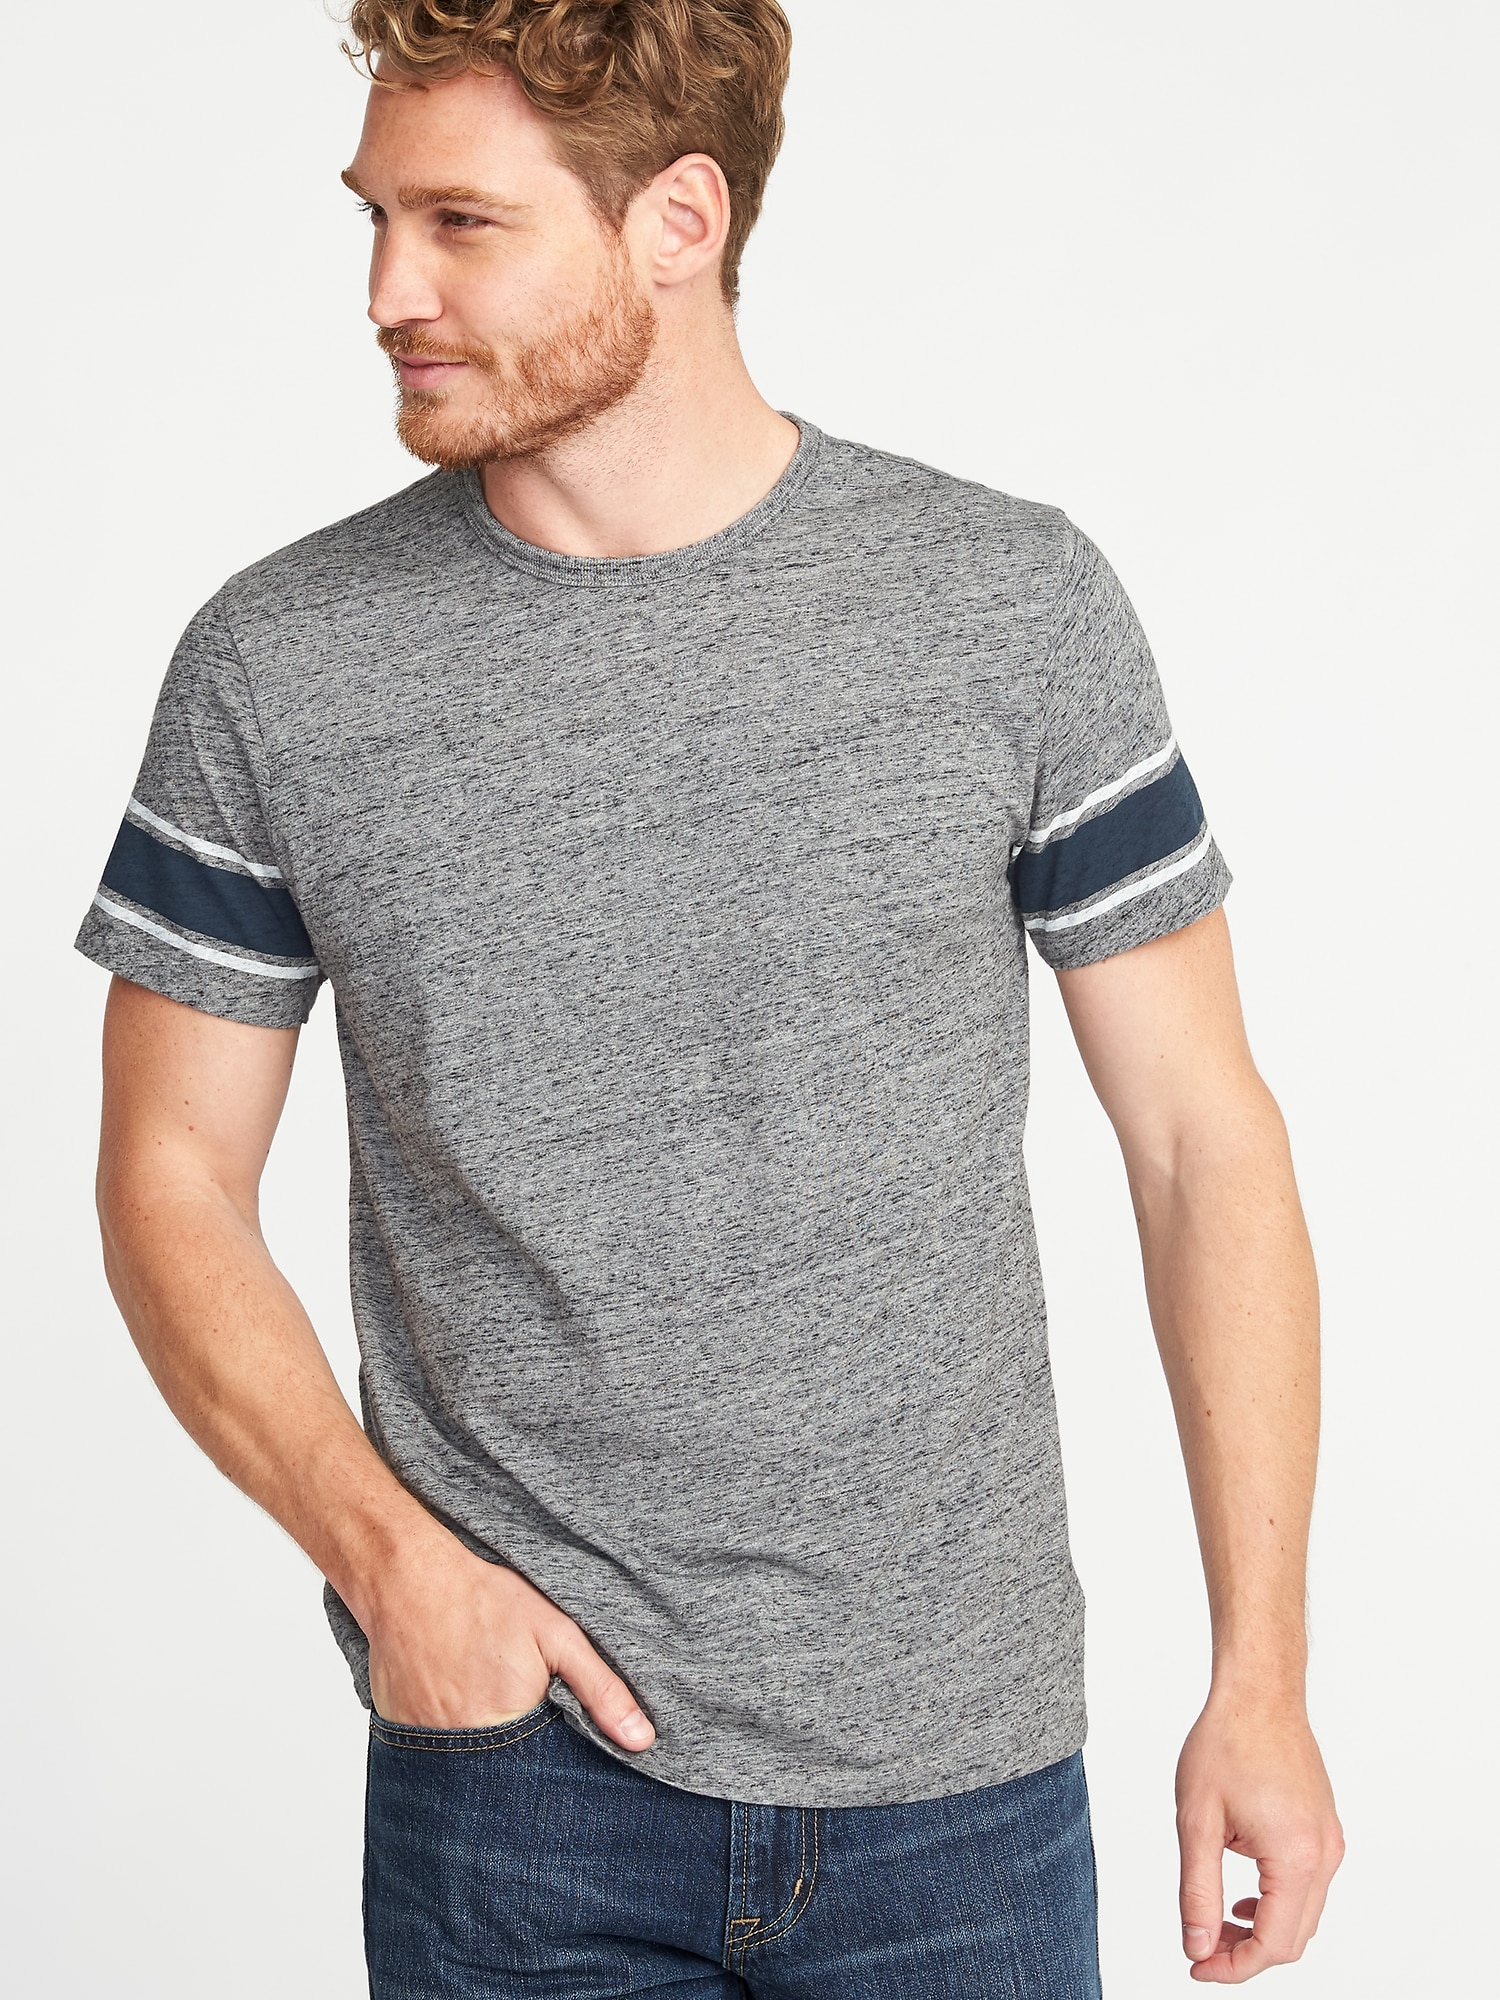 Soft-Washed Football-Style Tee for Men | Old Navy